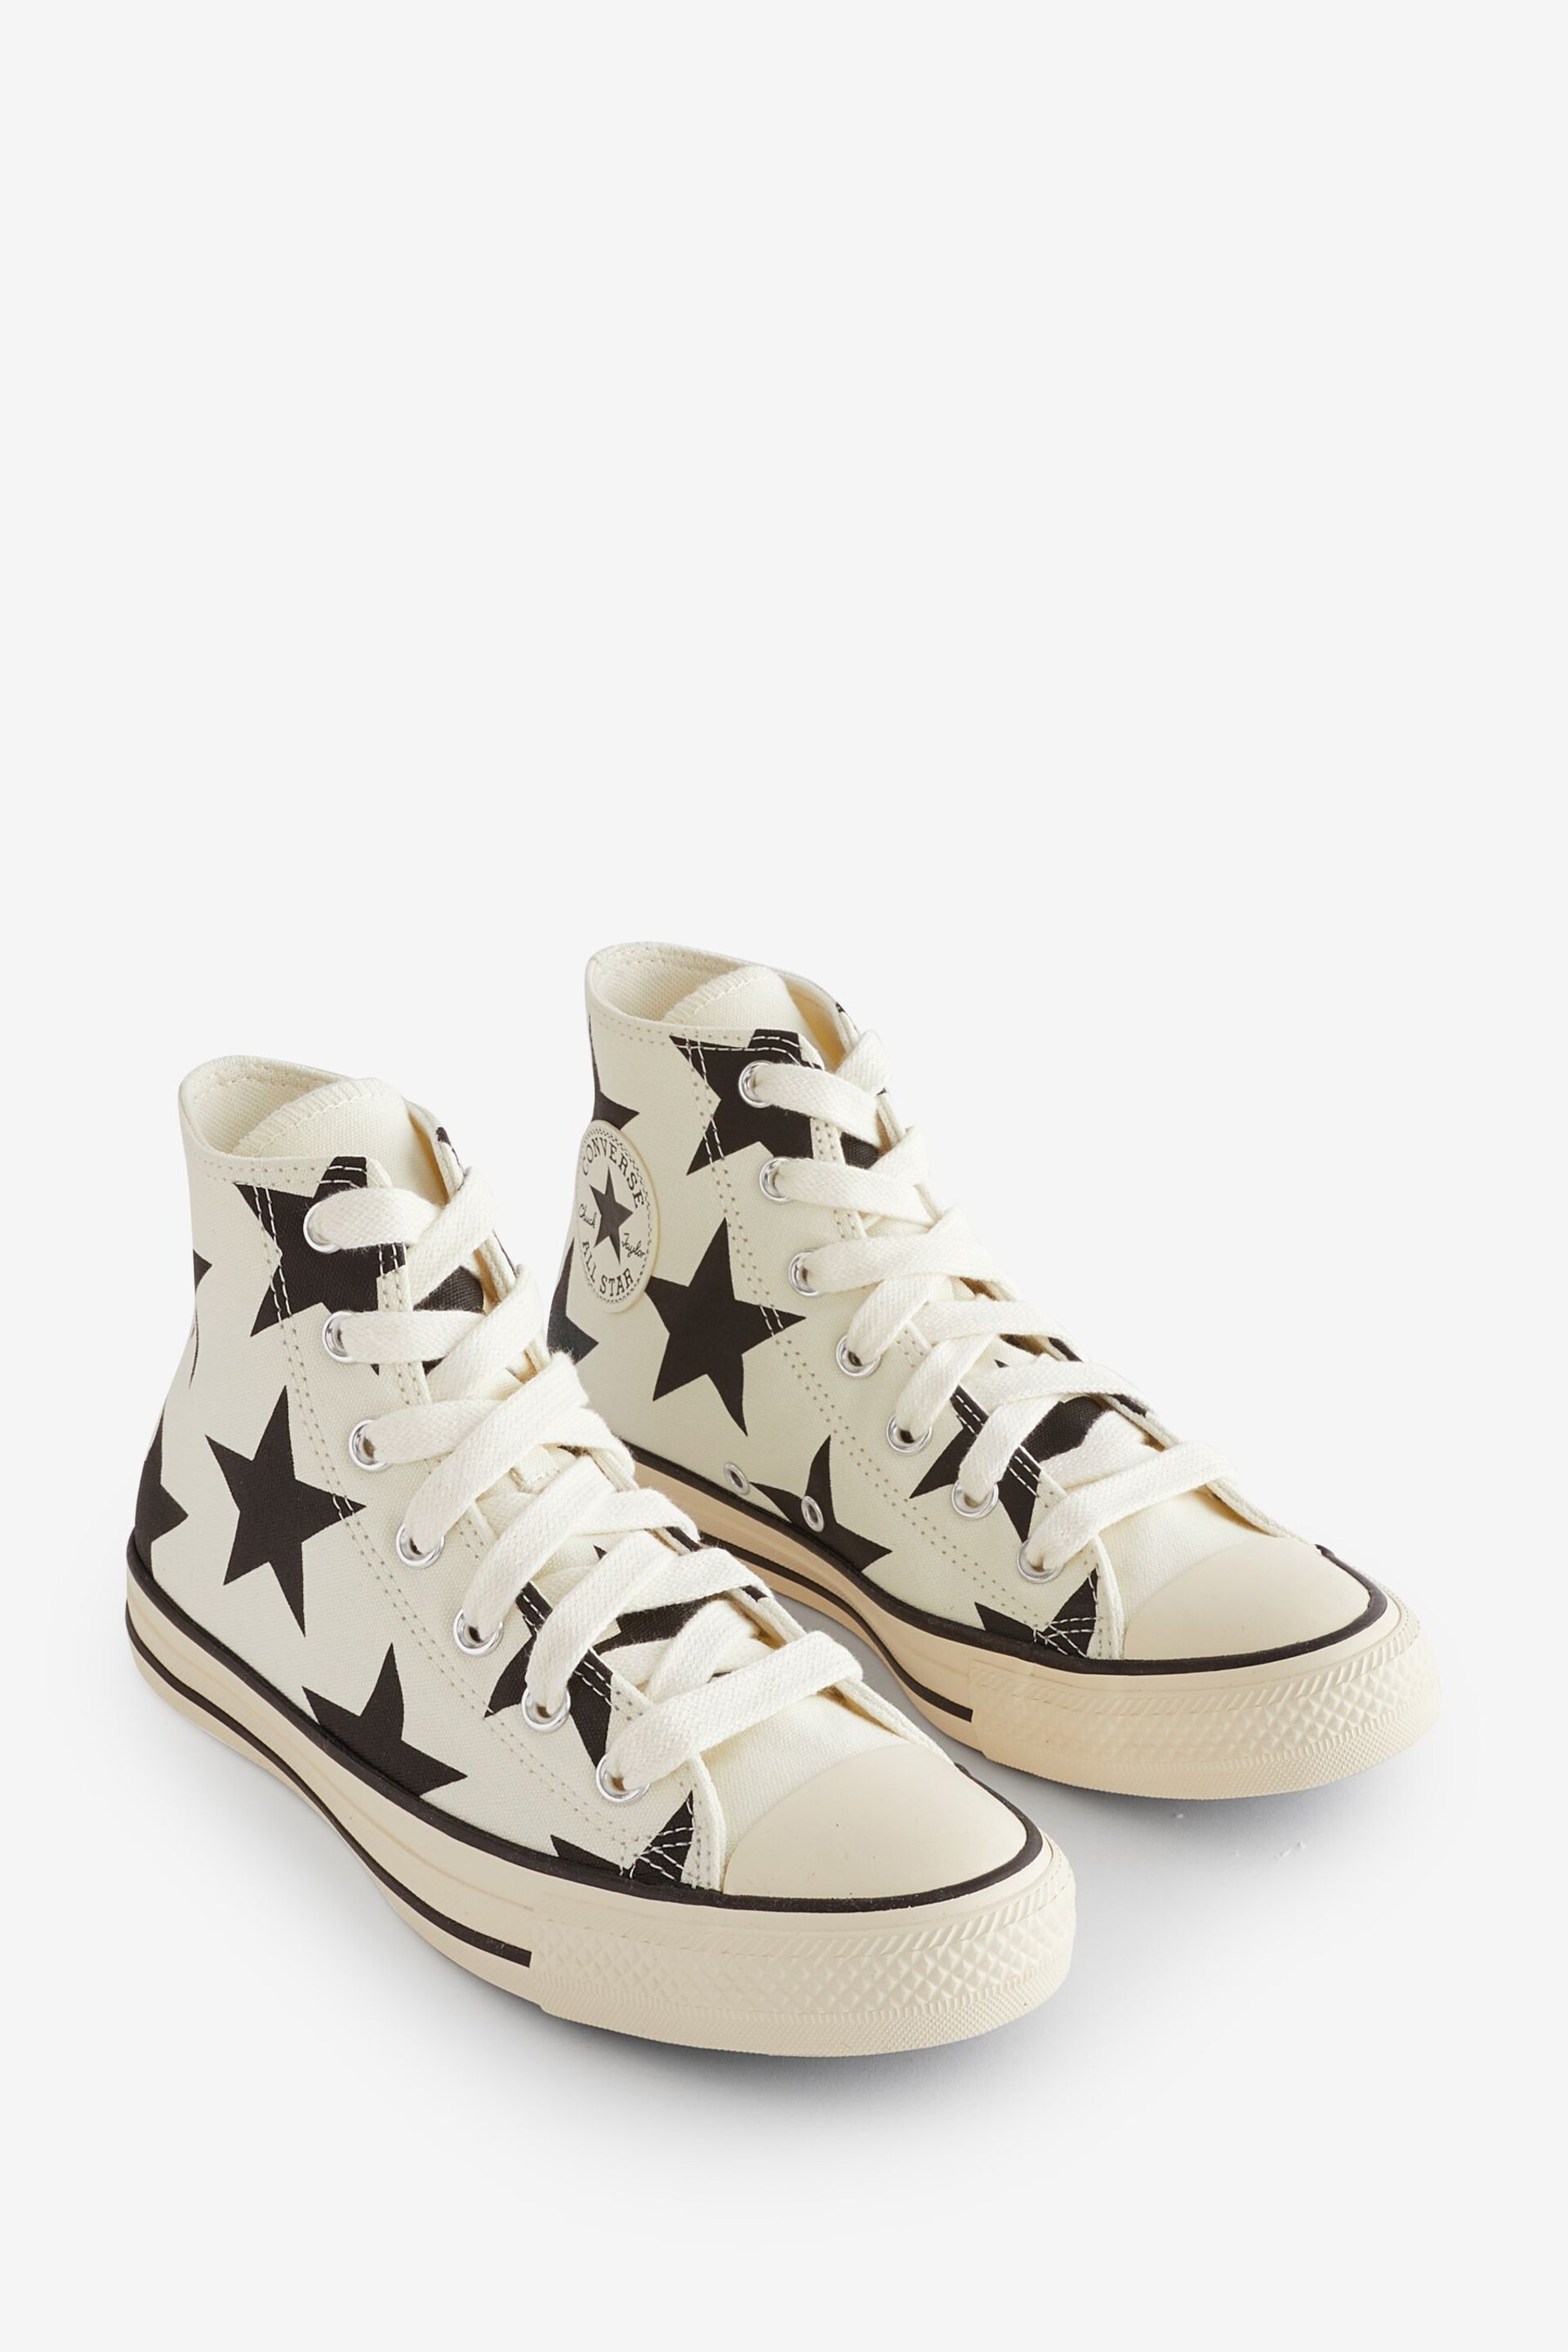 Converse White/Black Chuck Taylor All Star Lift Star Print Trainers - Image 3 of 9